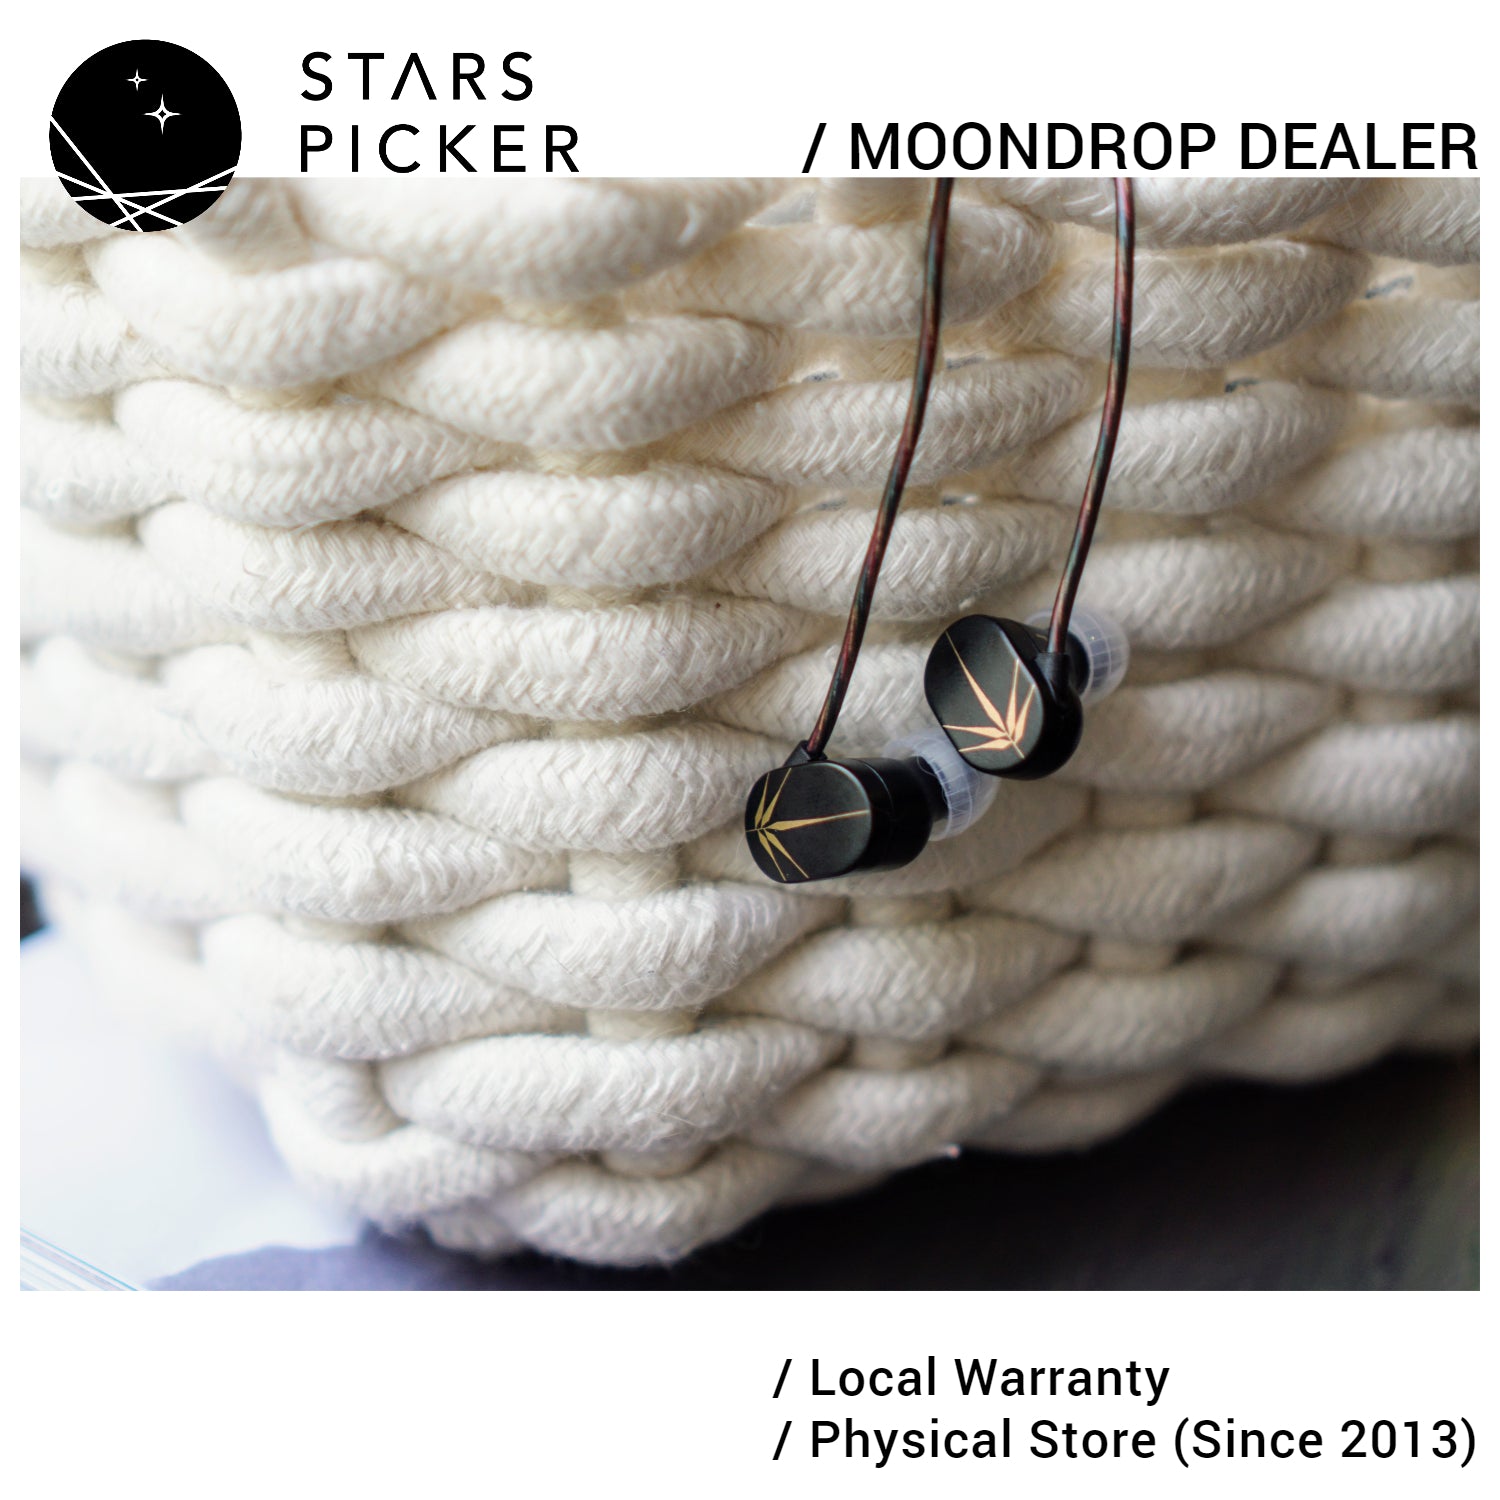 [5% off + 50% off for Spinfit] Moondrop Chu - Wired IEM earphone with 10mm Dynamic Driver